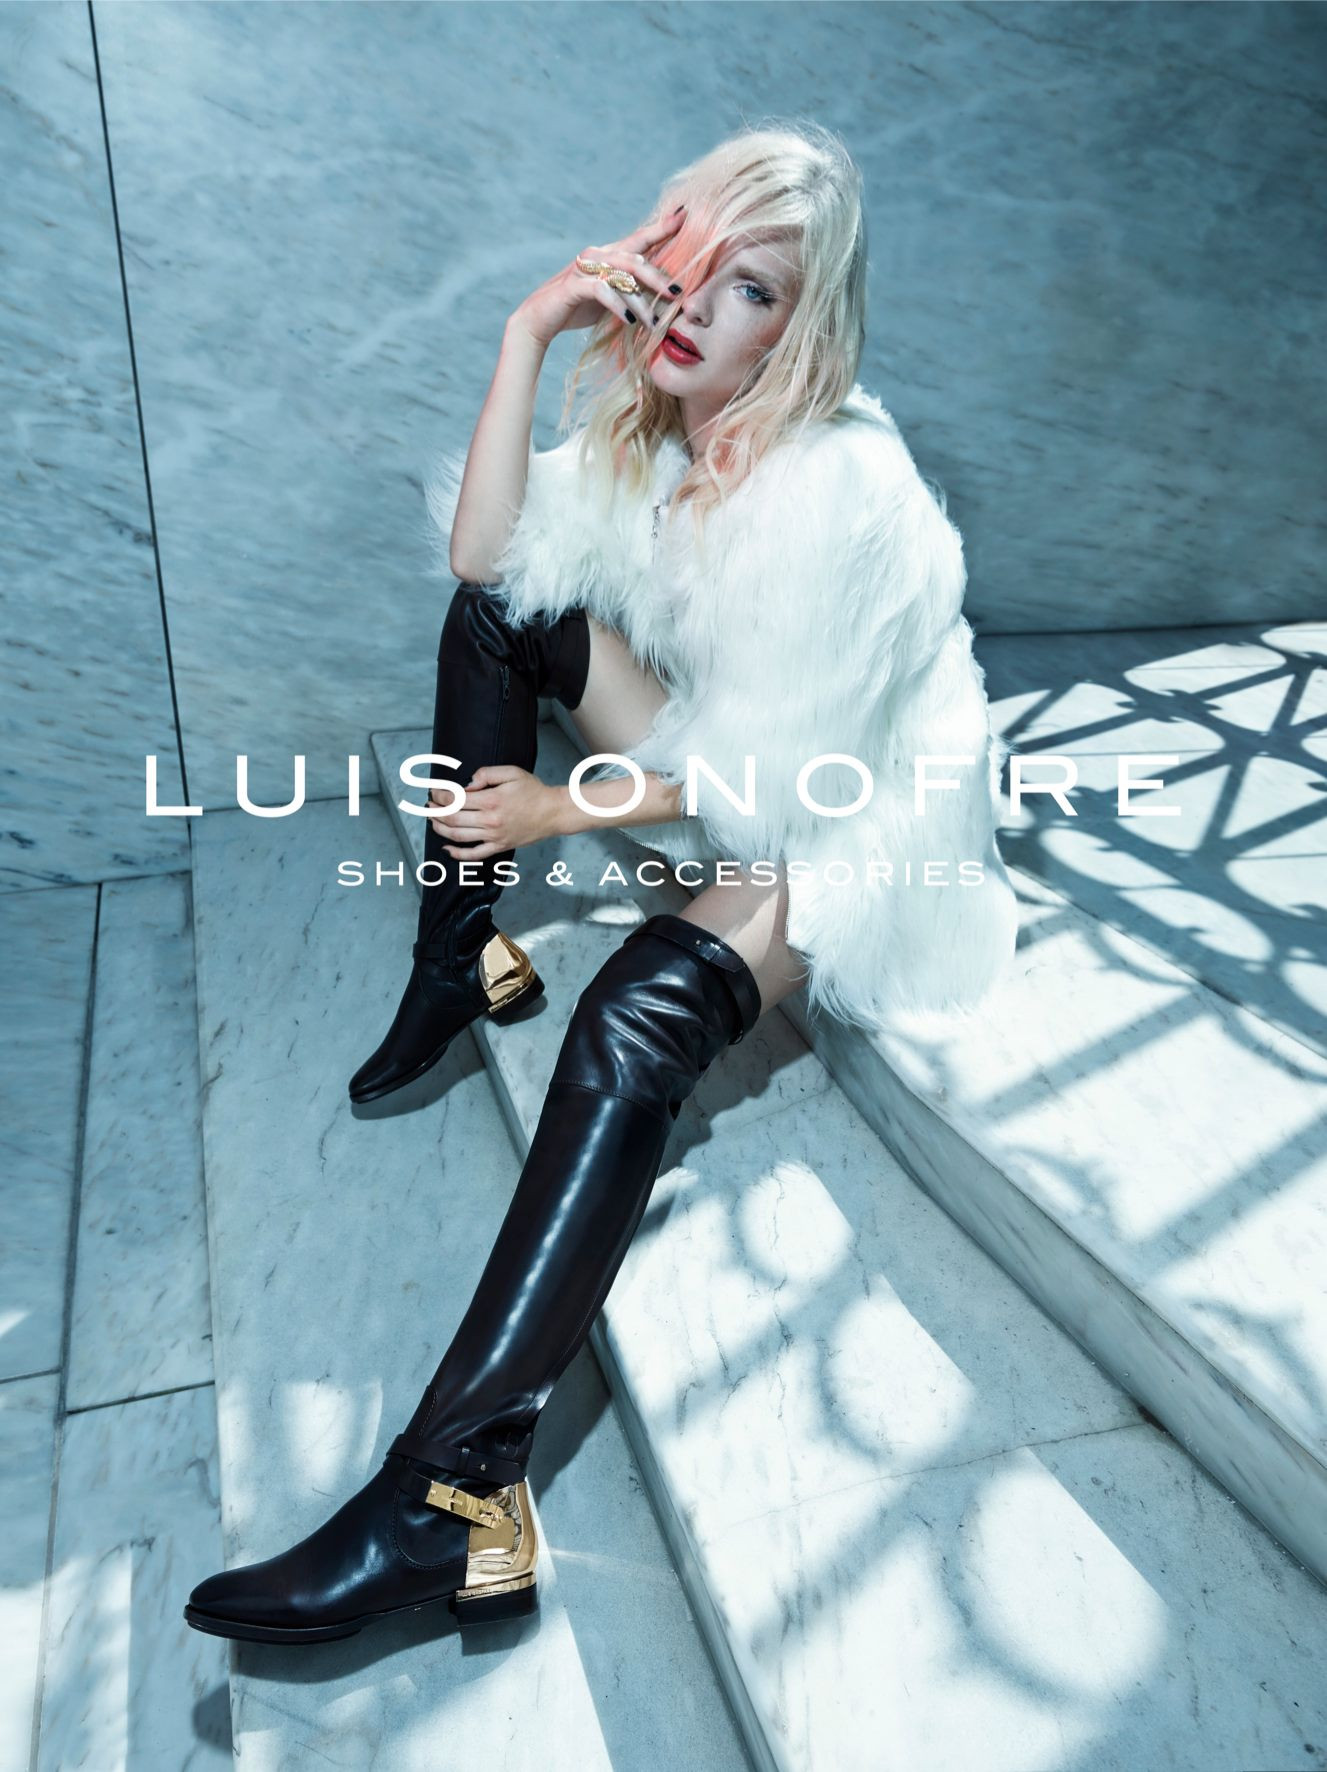 Luis Onofre Campanha FW14-15-1low.jpg